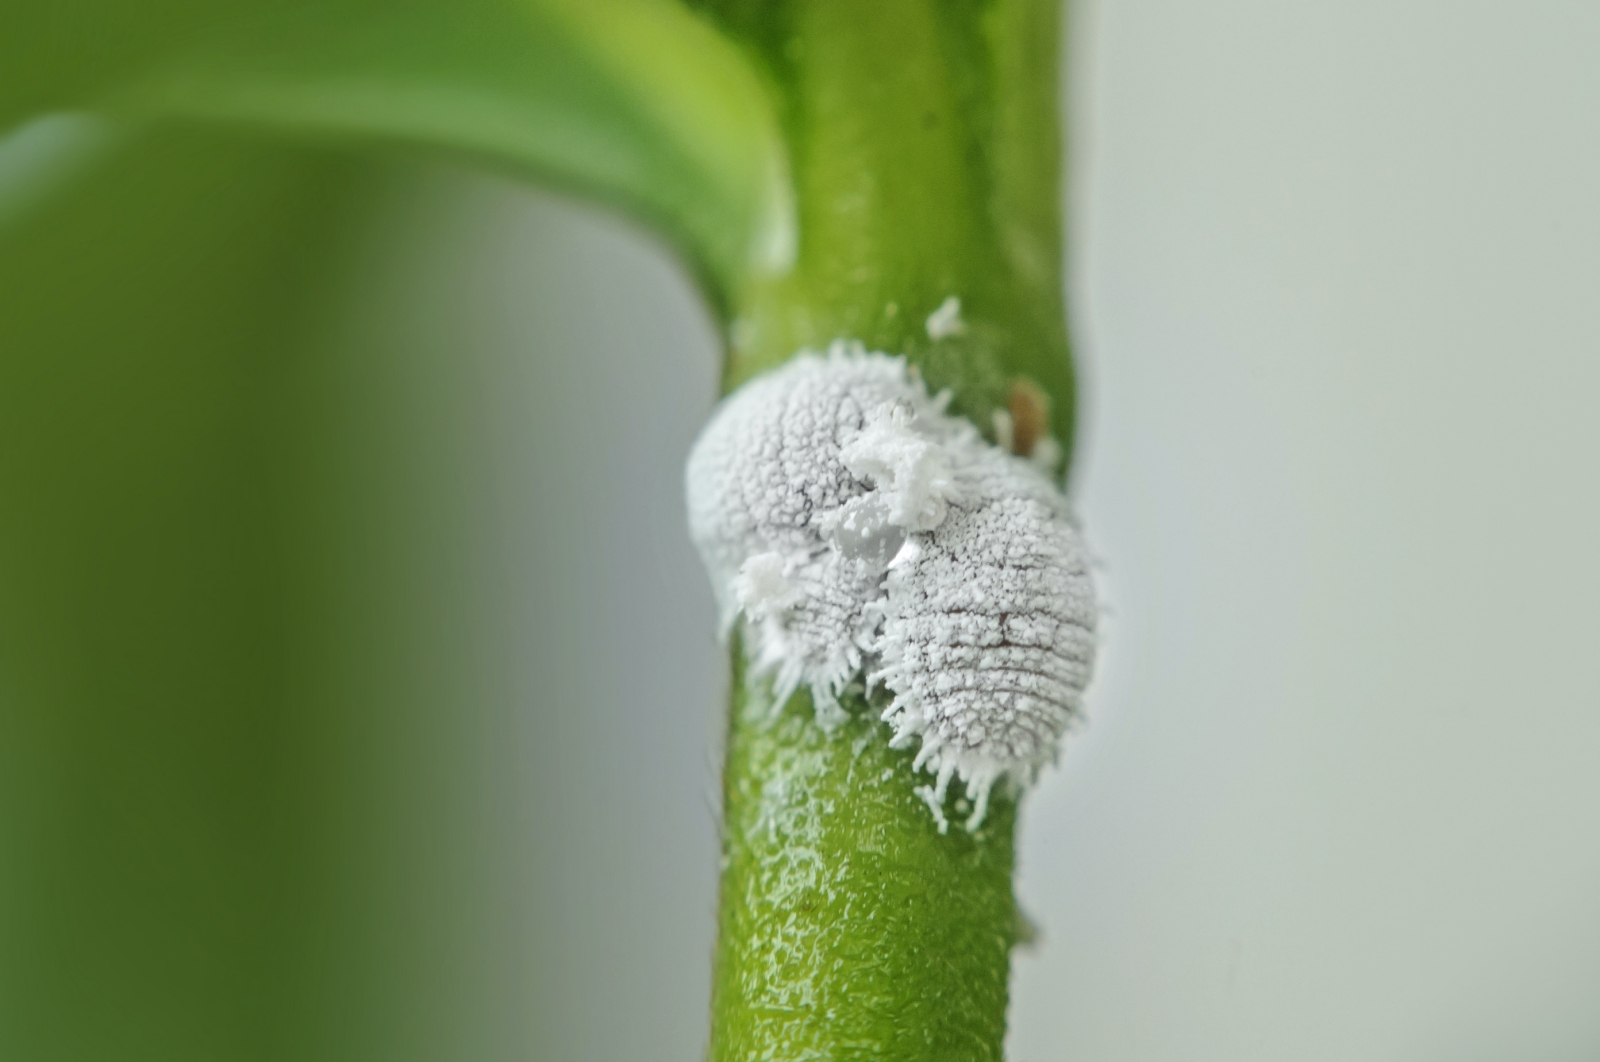 Mealy bugs on plant. Photo by OHishiapply/Shutterstock